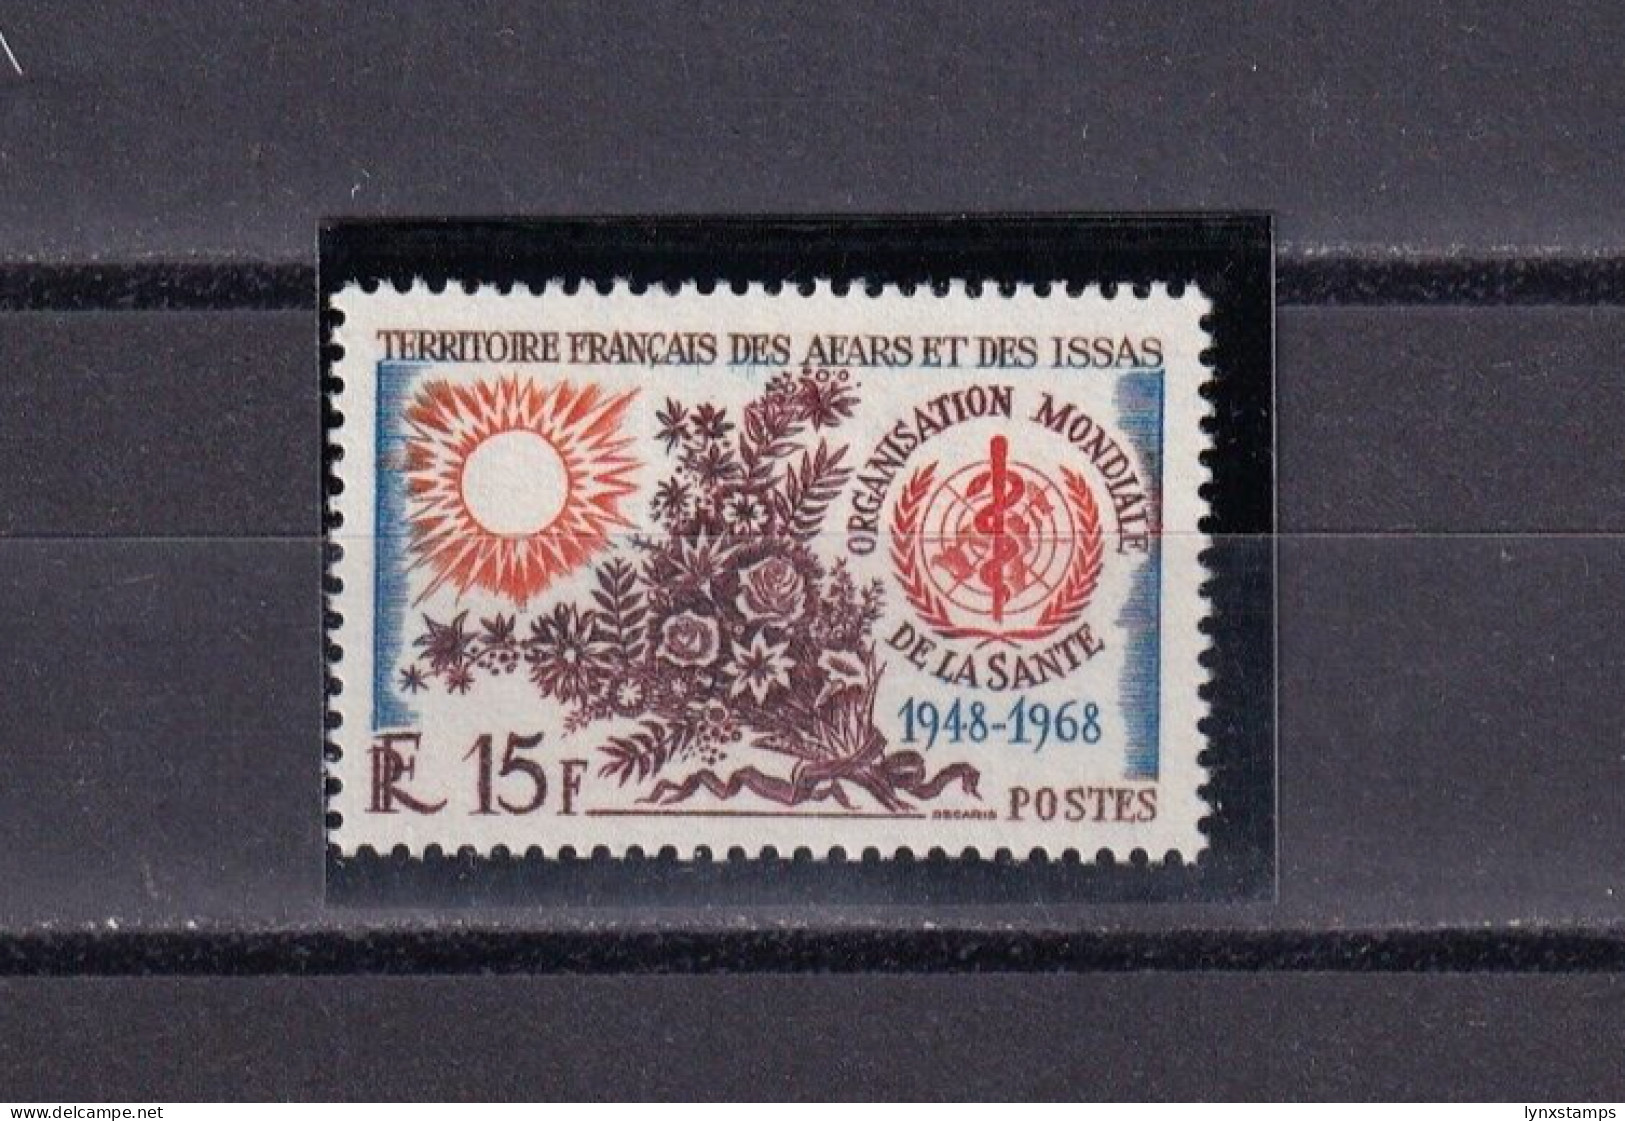 SA06c Djibouti French Territory Of Afars And The Issas 1968 W.H.O. - 20th Anniv - Ungebraucht